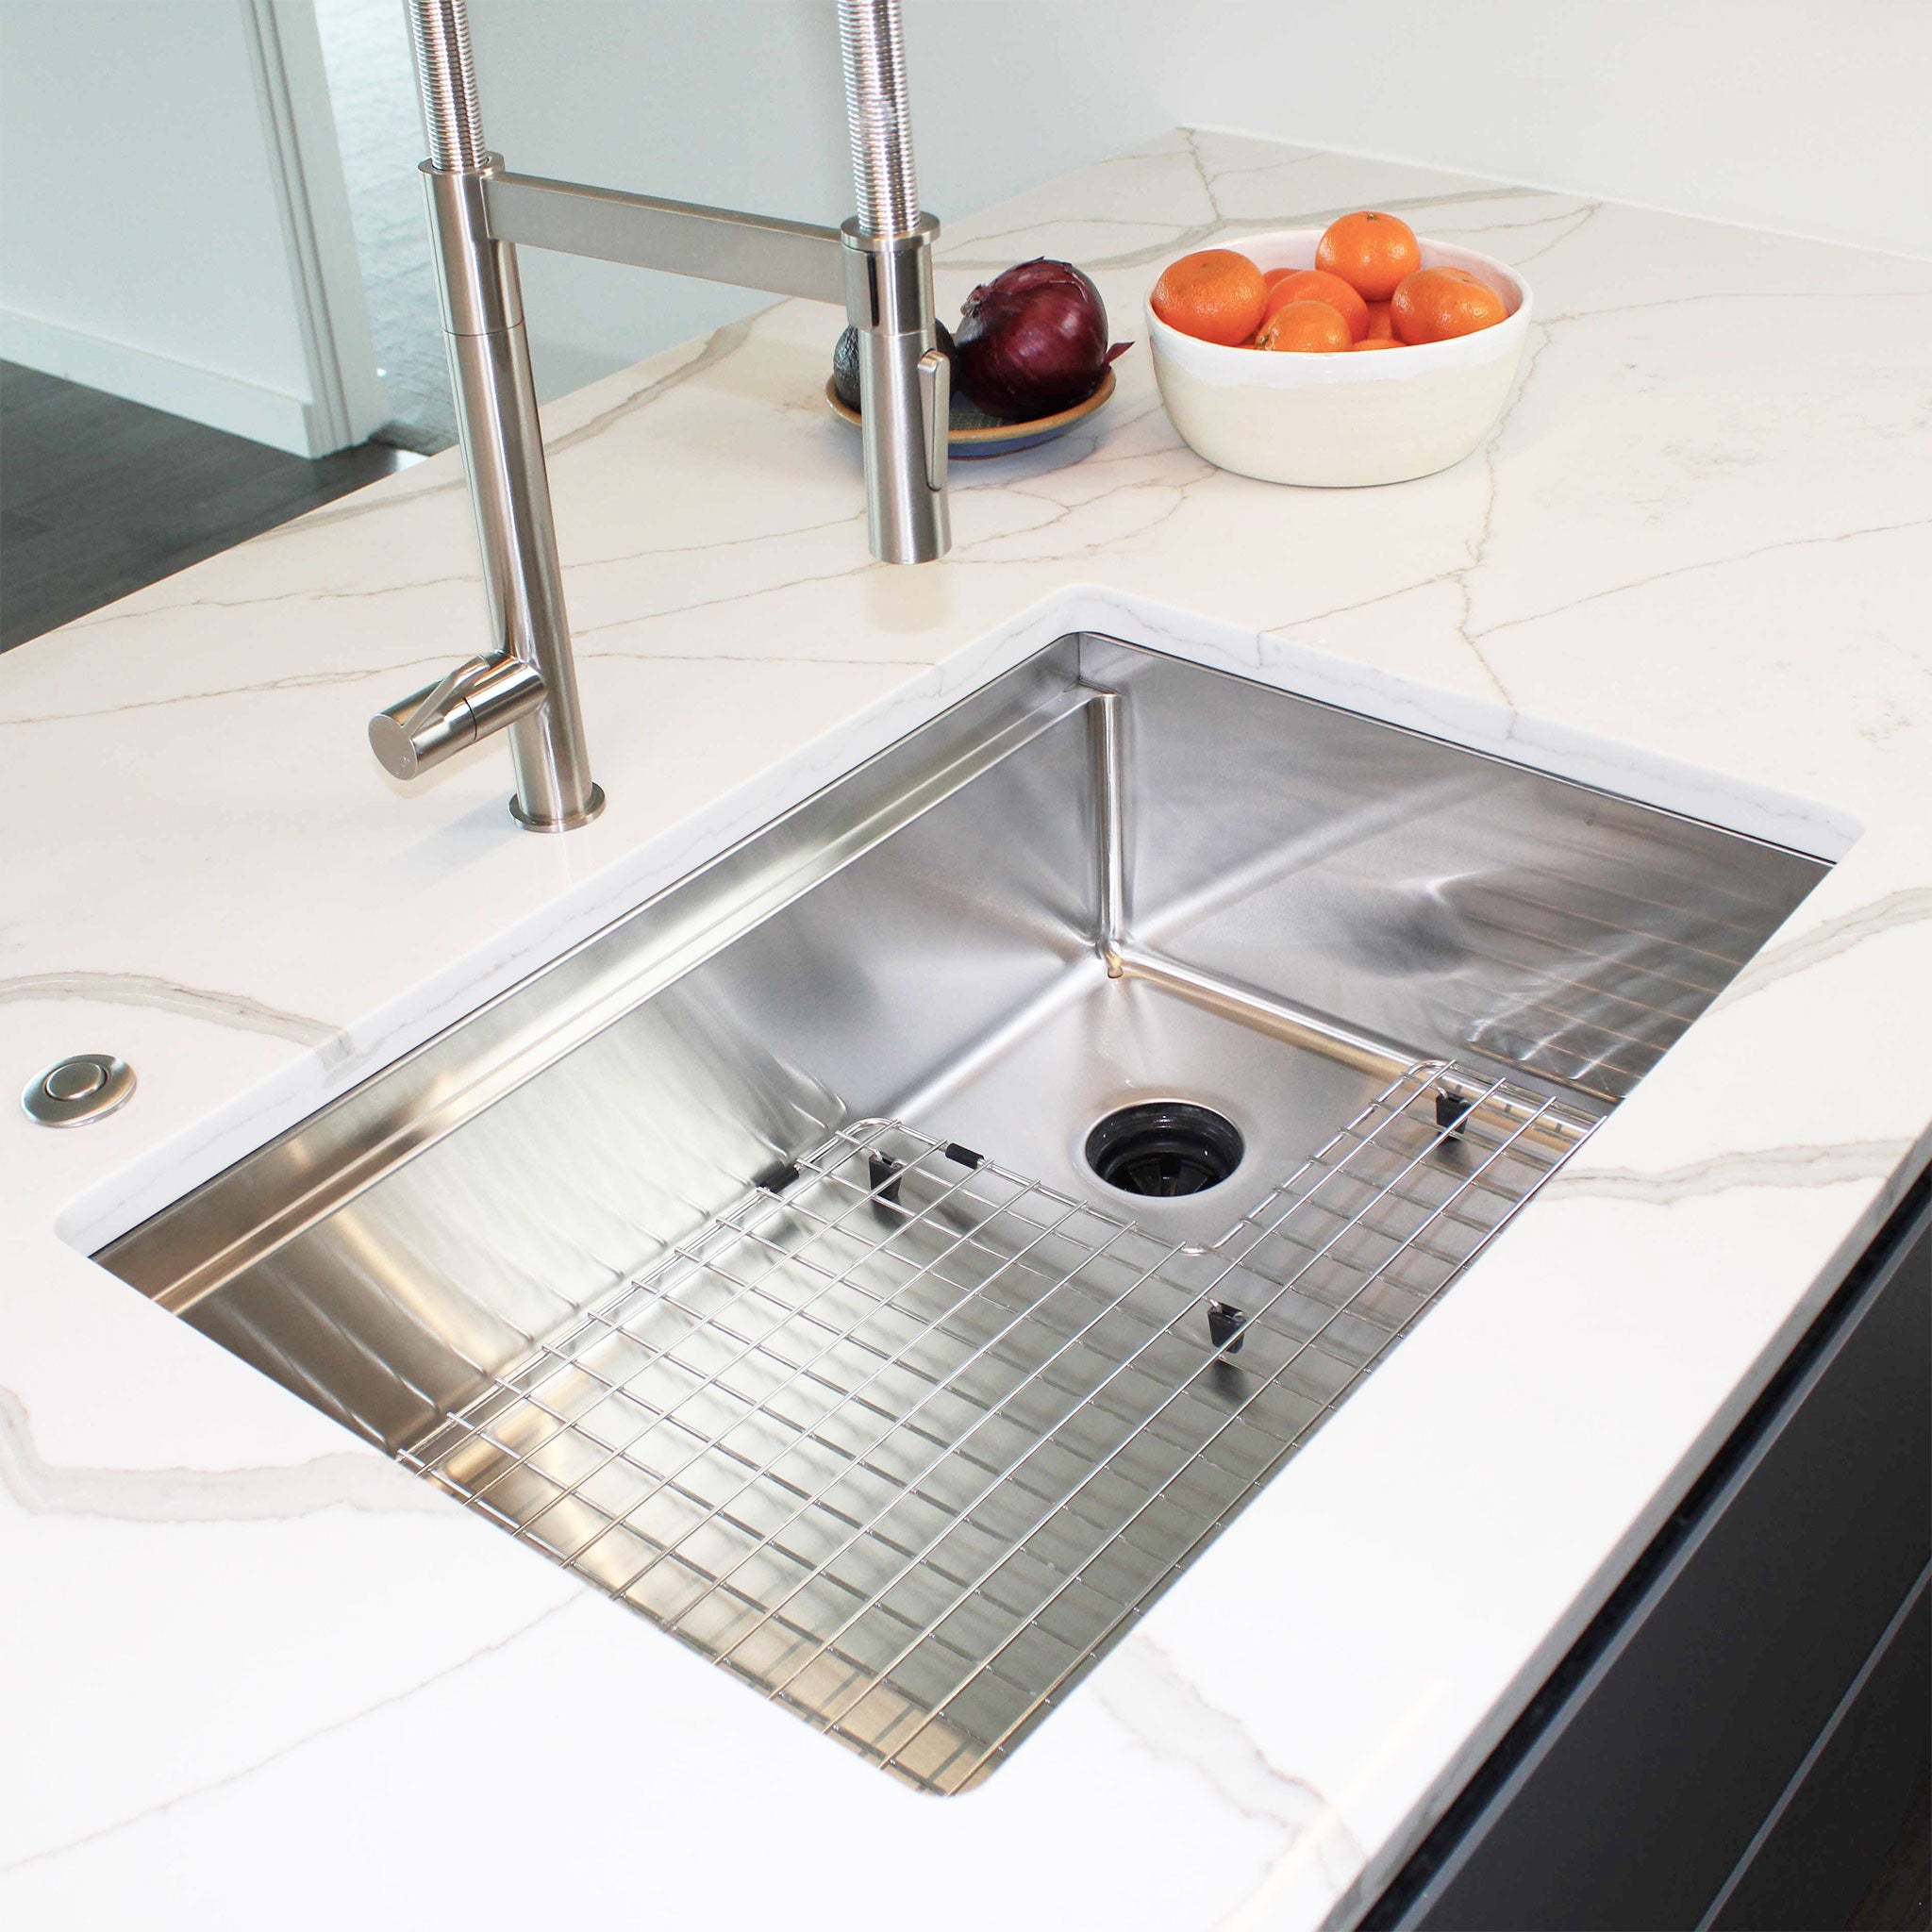 Client submitted photo of the 28” workstation kitchen sink from Create Good with a right, offset seamless drain.